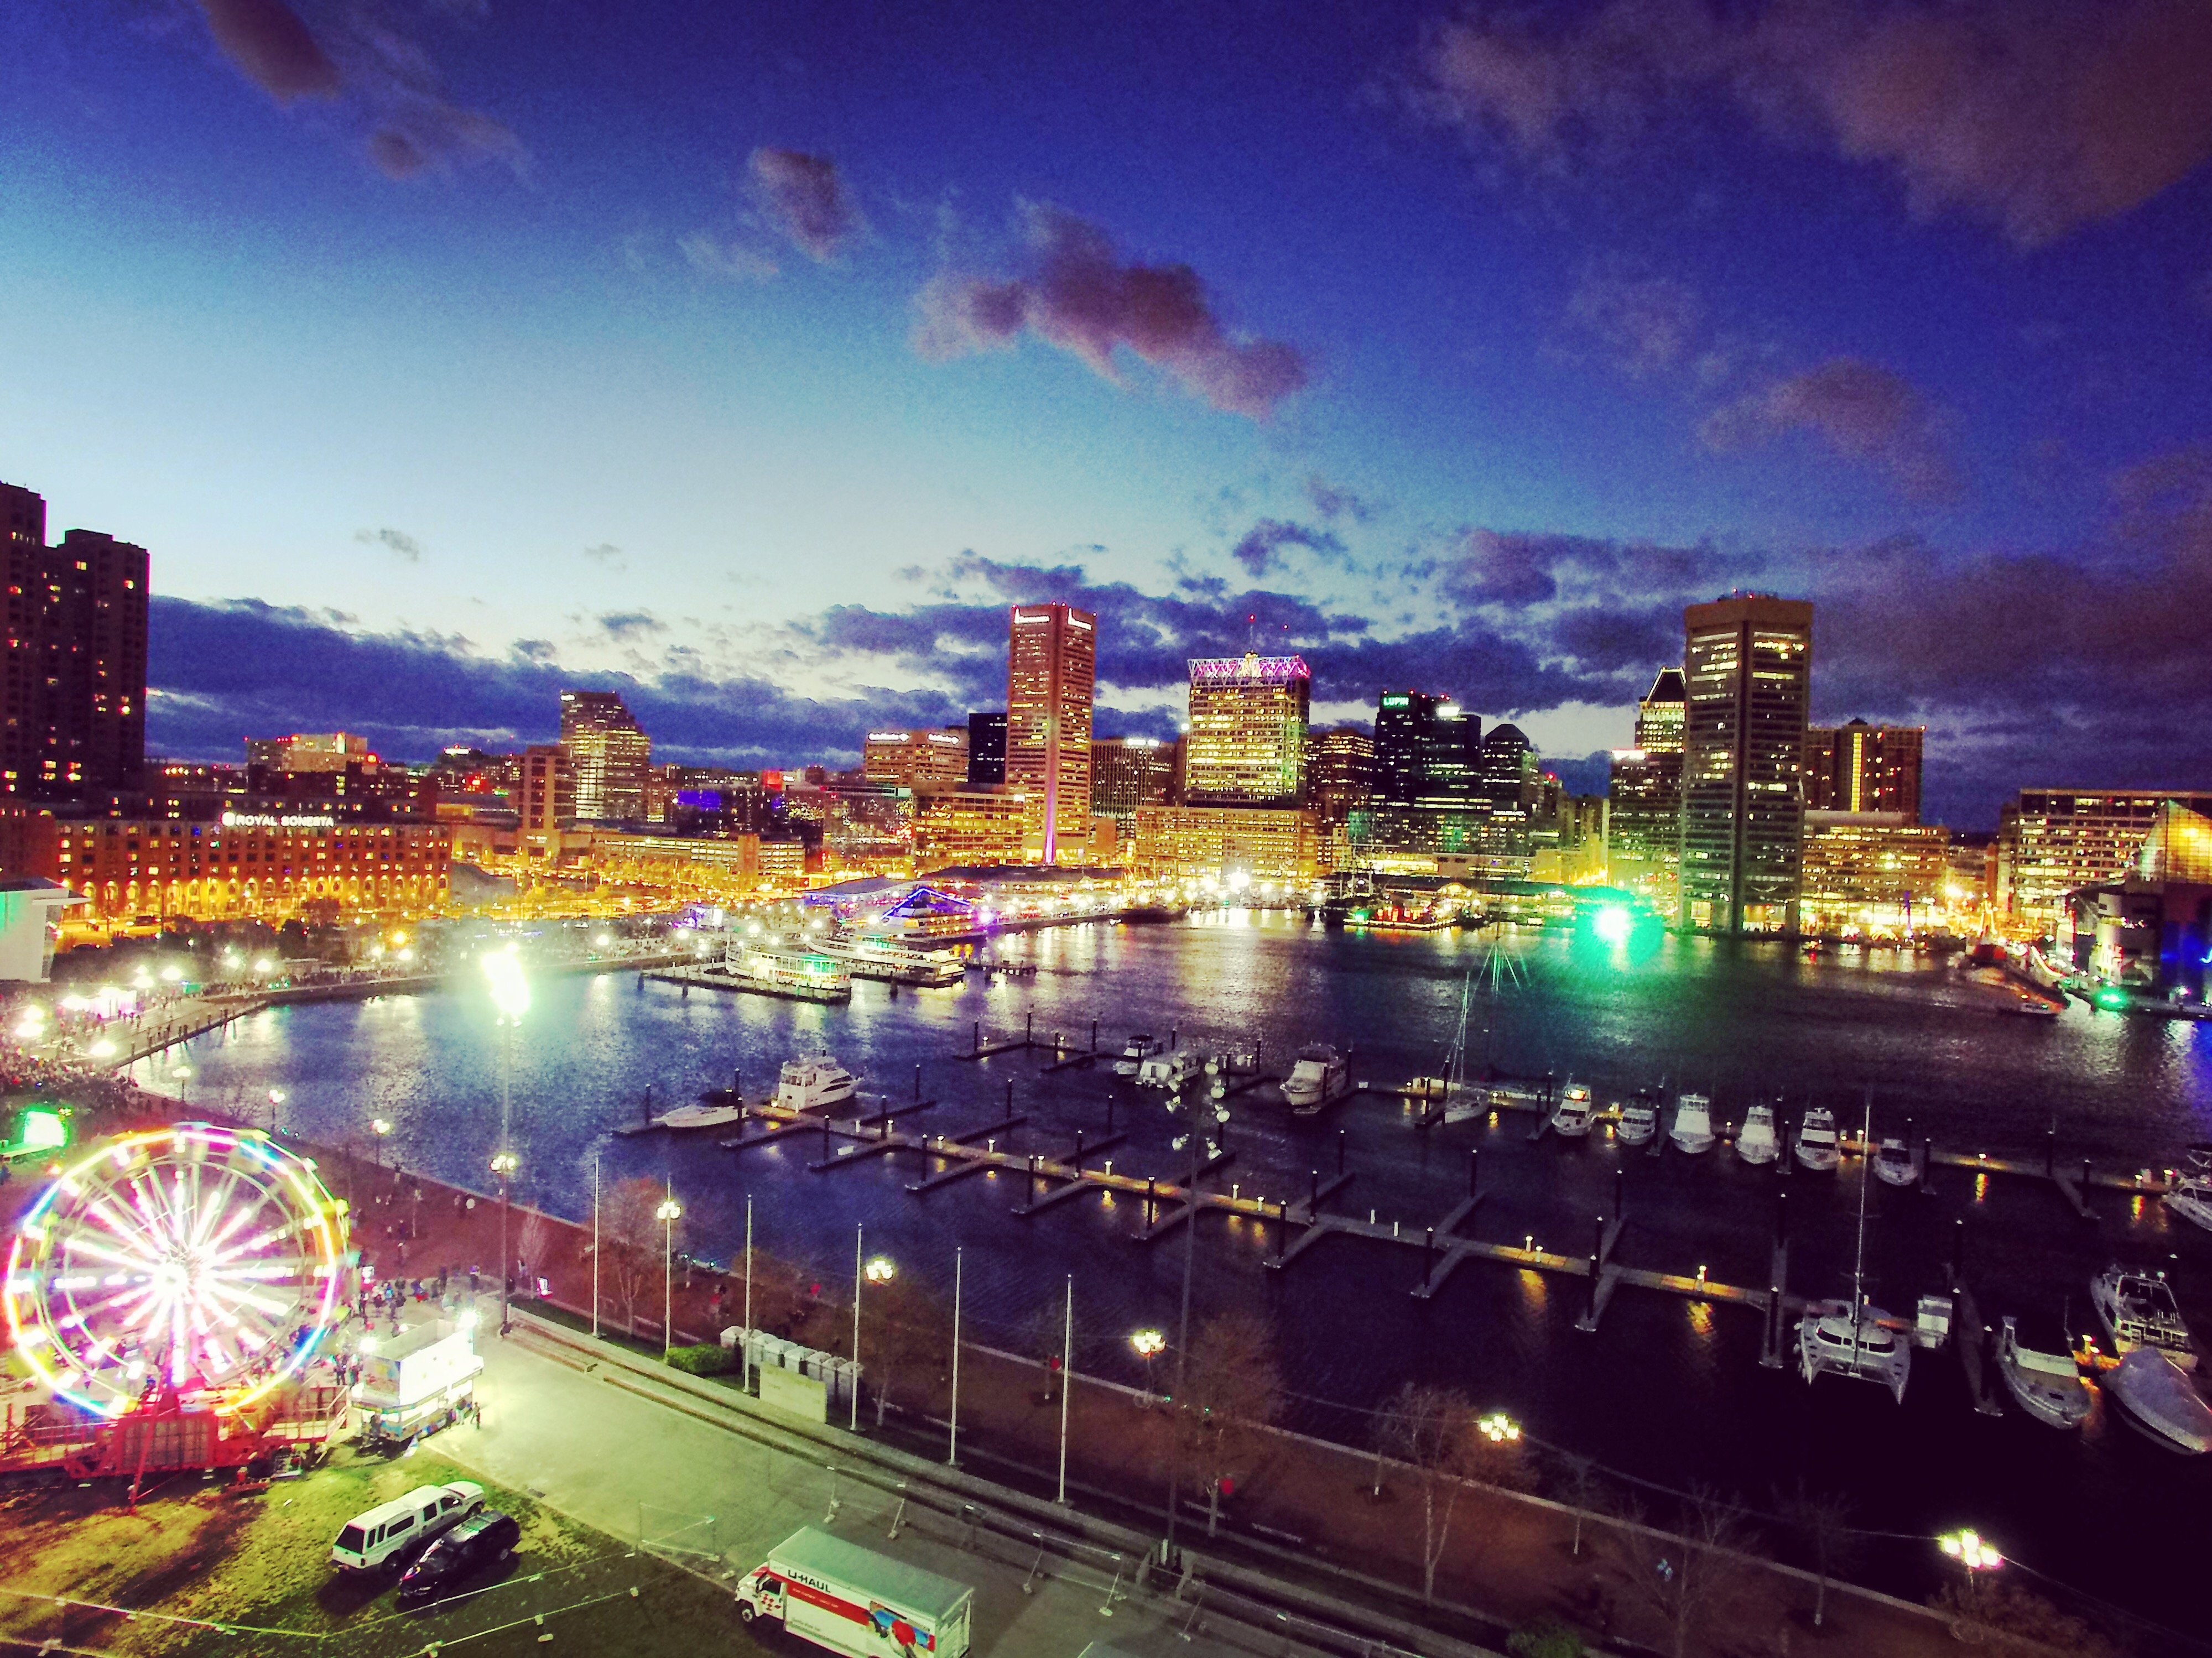 Light Art Festival Bathes Blighted Baltimore in A Sea of Color The